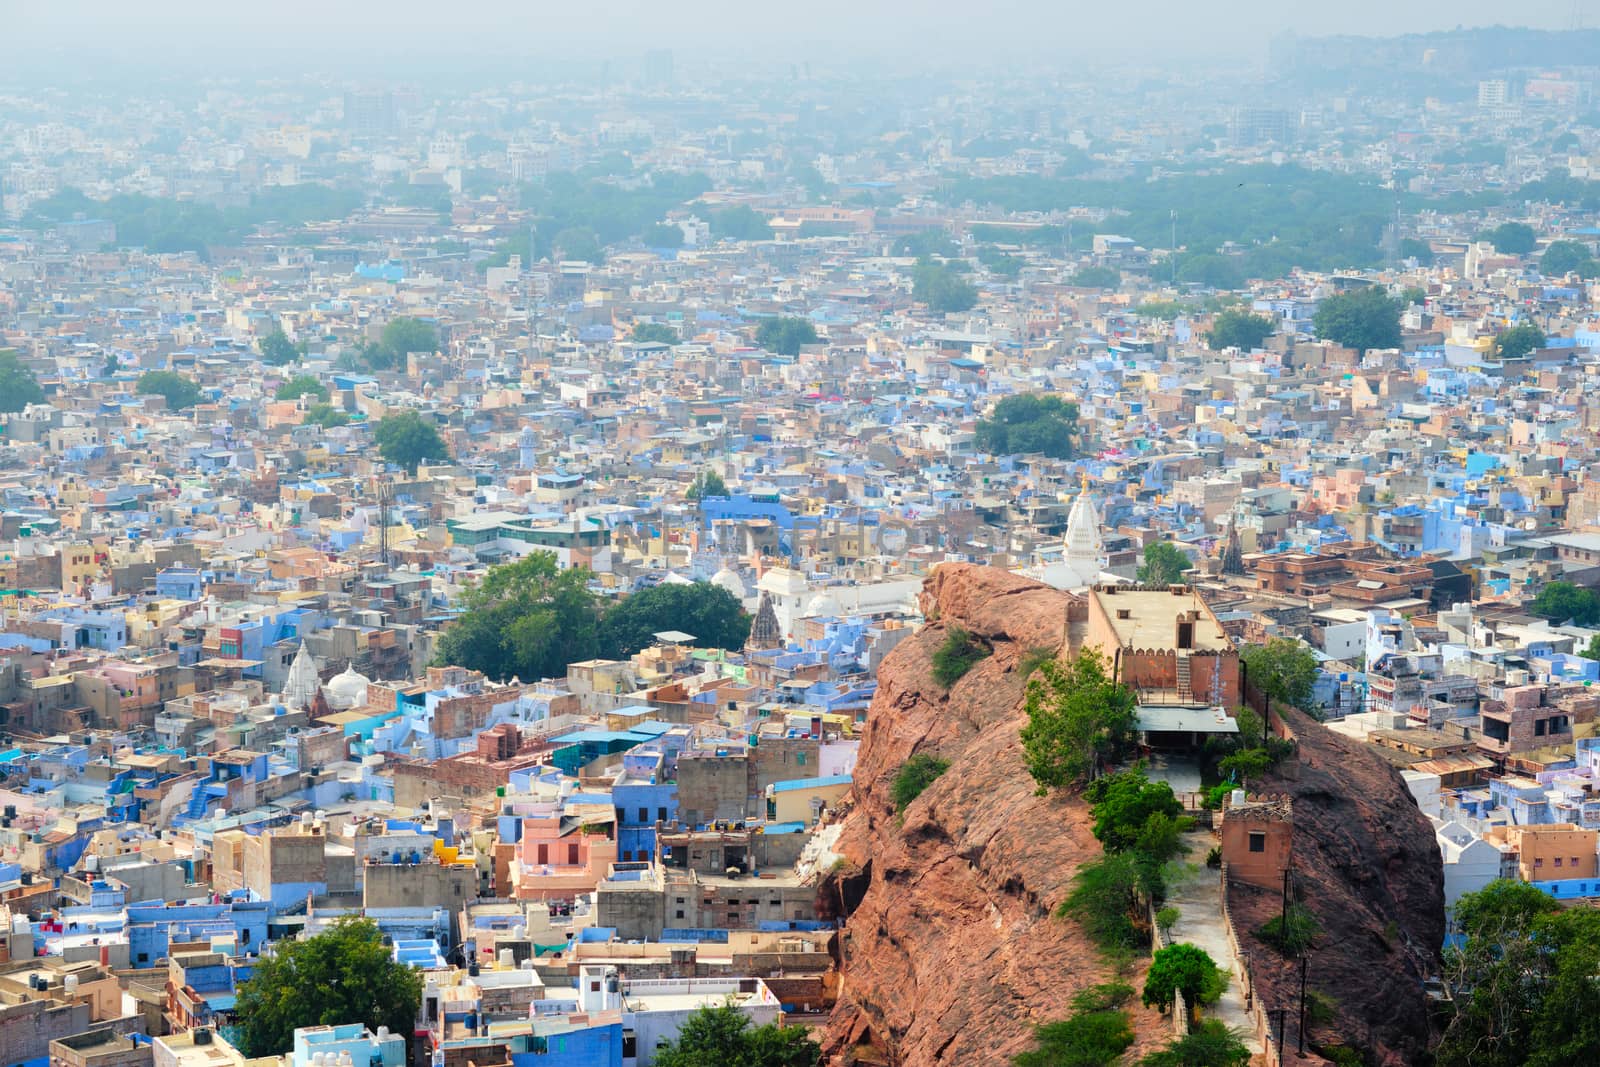 Aerial view of Jodhpur, also known as Blue City due to the vivid blue-painted Brahmin houses around Mehrangarh Fort. Jodphur, Rajasthan